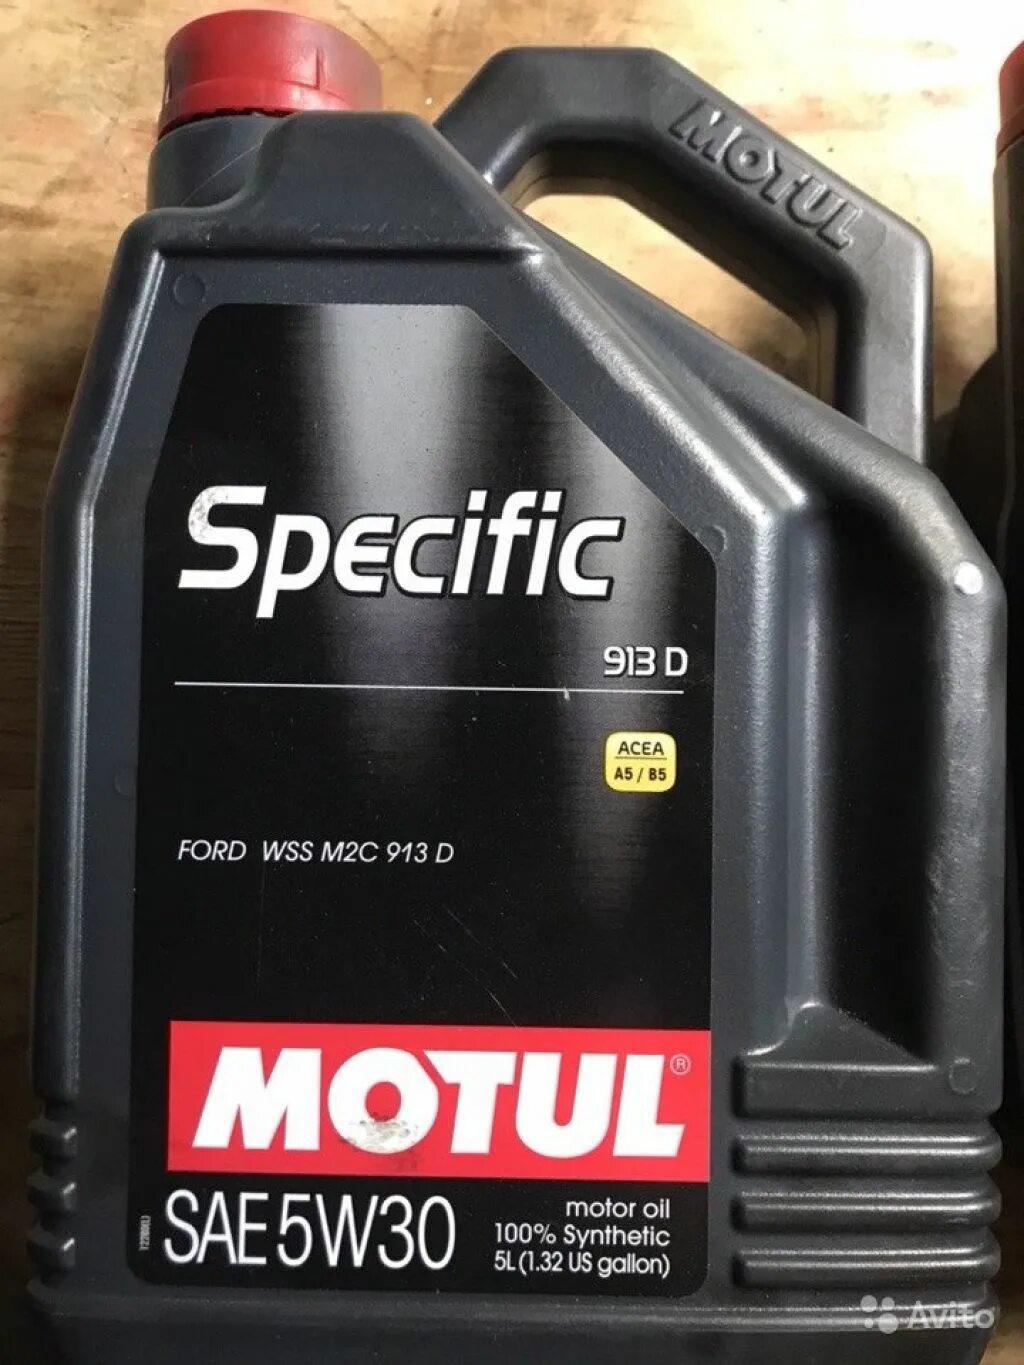 Масло specific 5w30. Motul specific Ford 913d. Motul specific 5w30 specific. Моторное масло Motul specific 913d 5w30 5 л. Specific 913 d 5w-30.